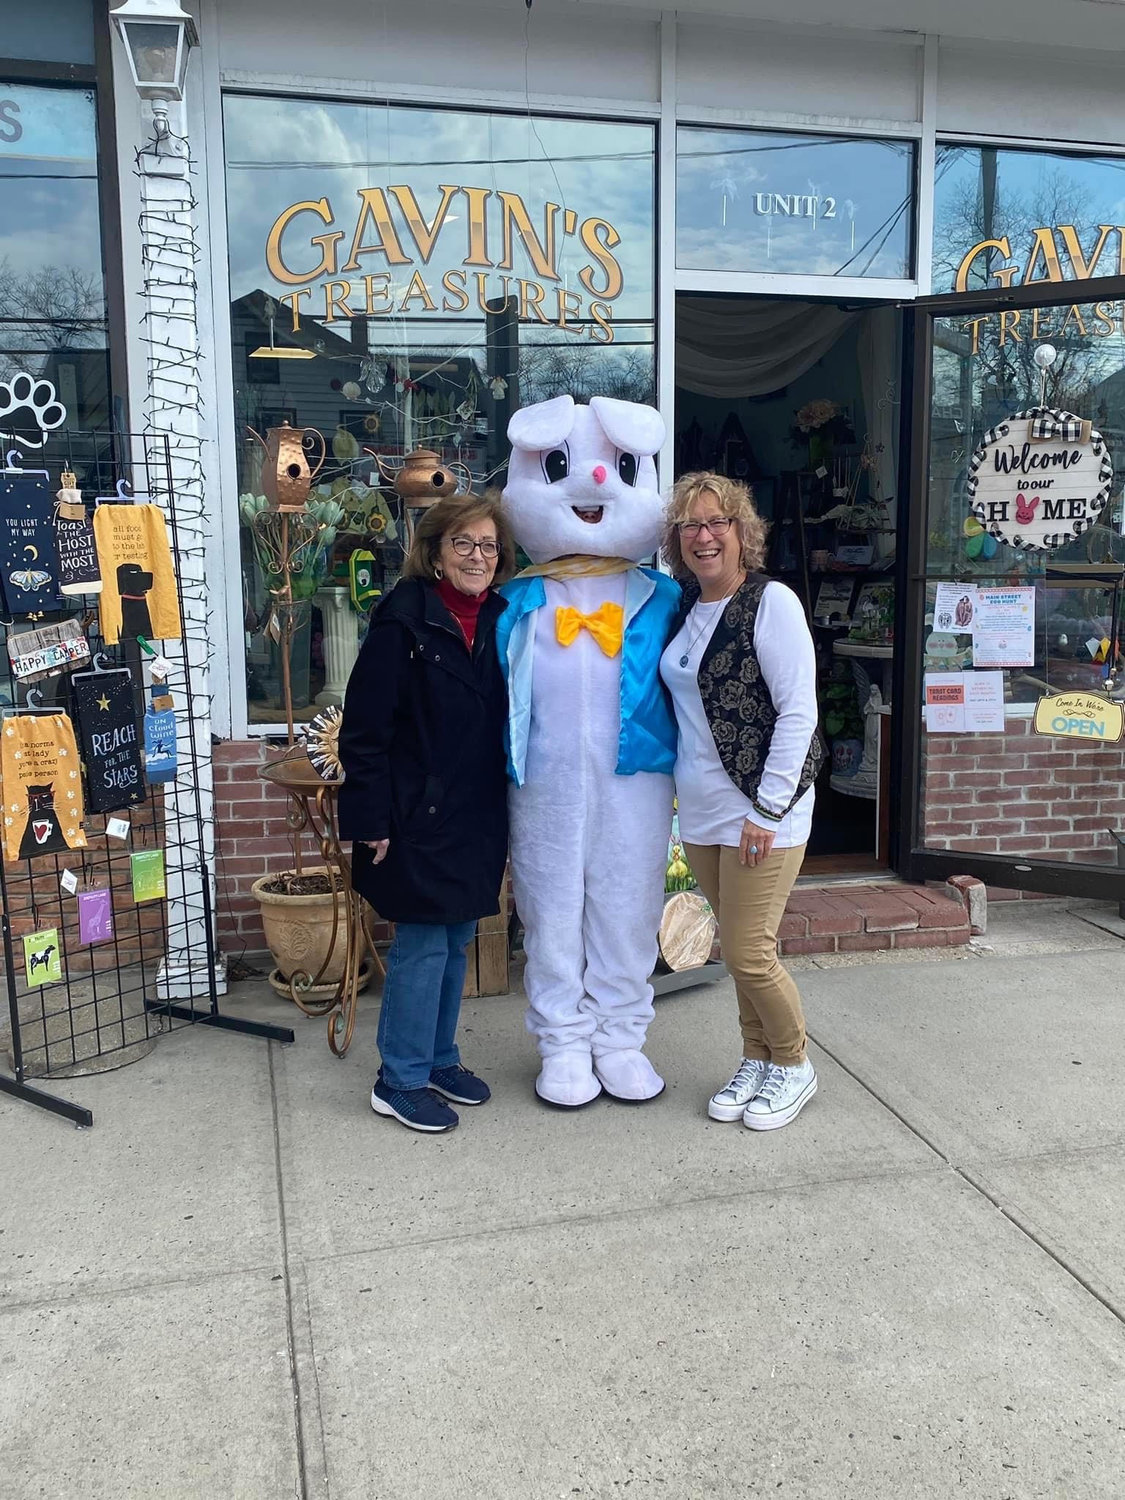 Several Main Street merchants participated
in the Easter egg hunt.